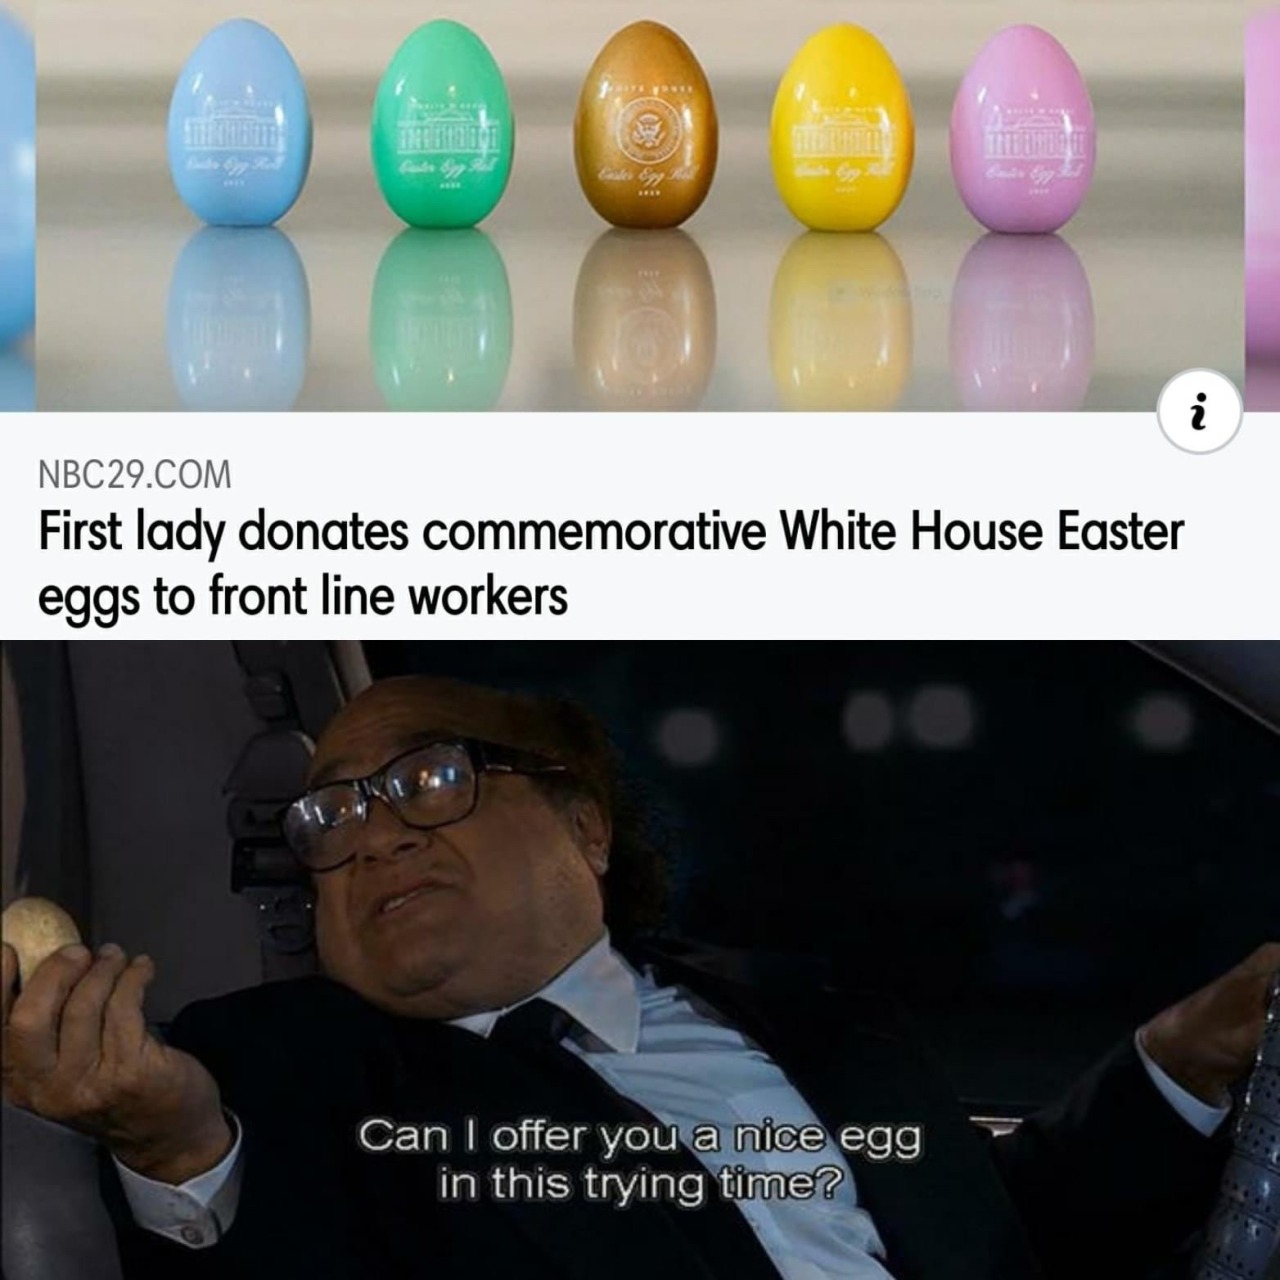 you are on this council but we do not grant you the rank of master - NBC29.Com First lady donates commemorative White House Easter eggs to front line workers Can I offer you a nice egg in this trying time?